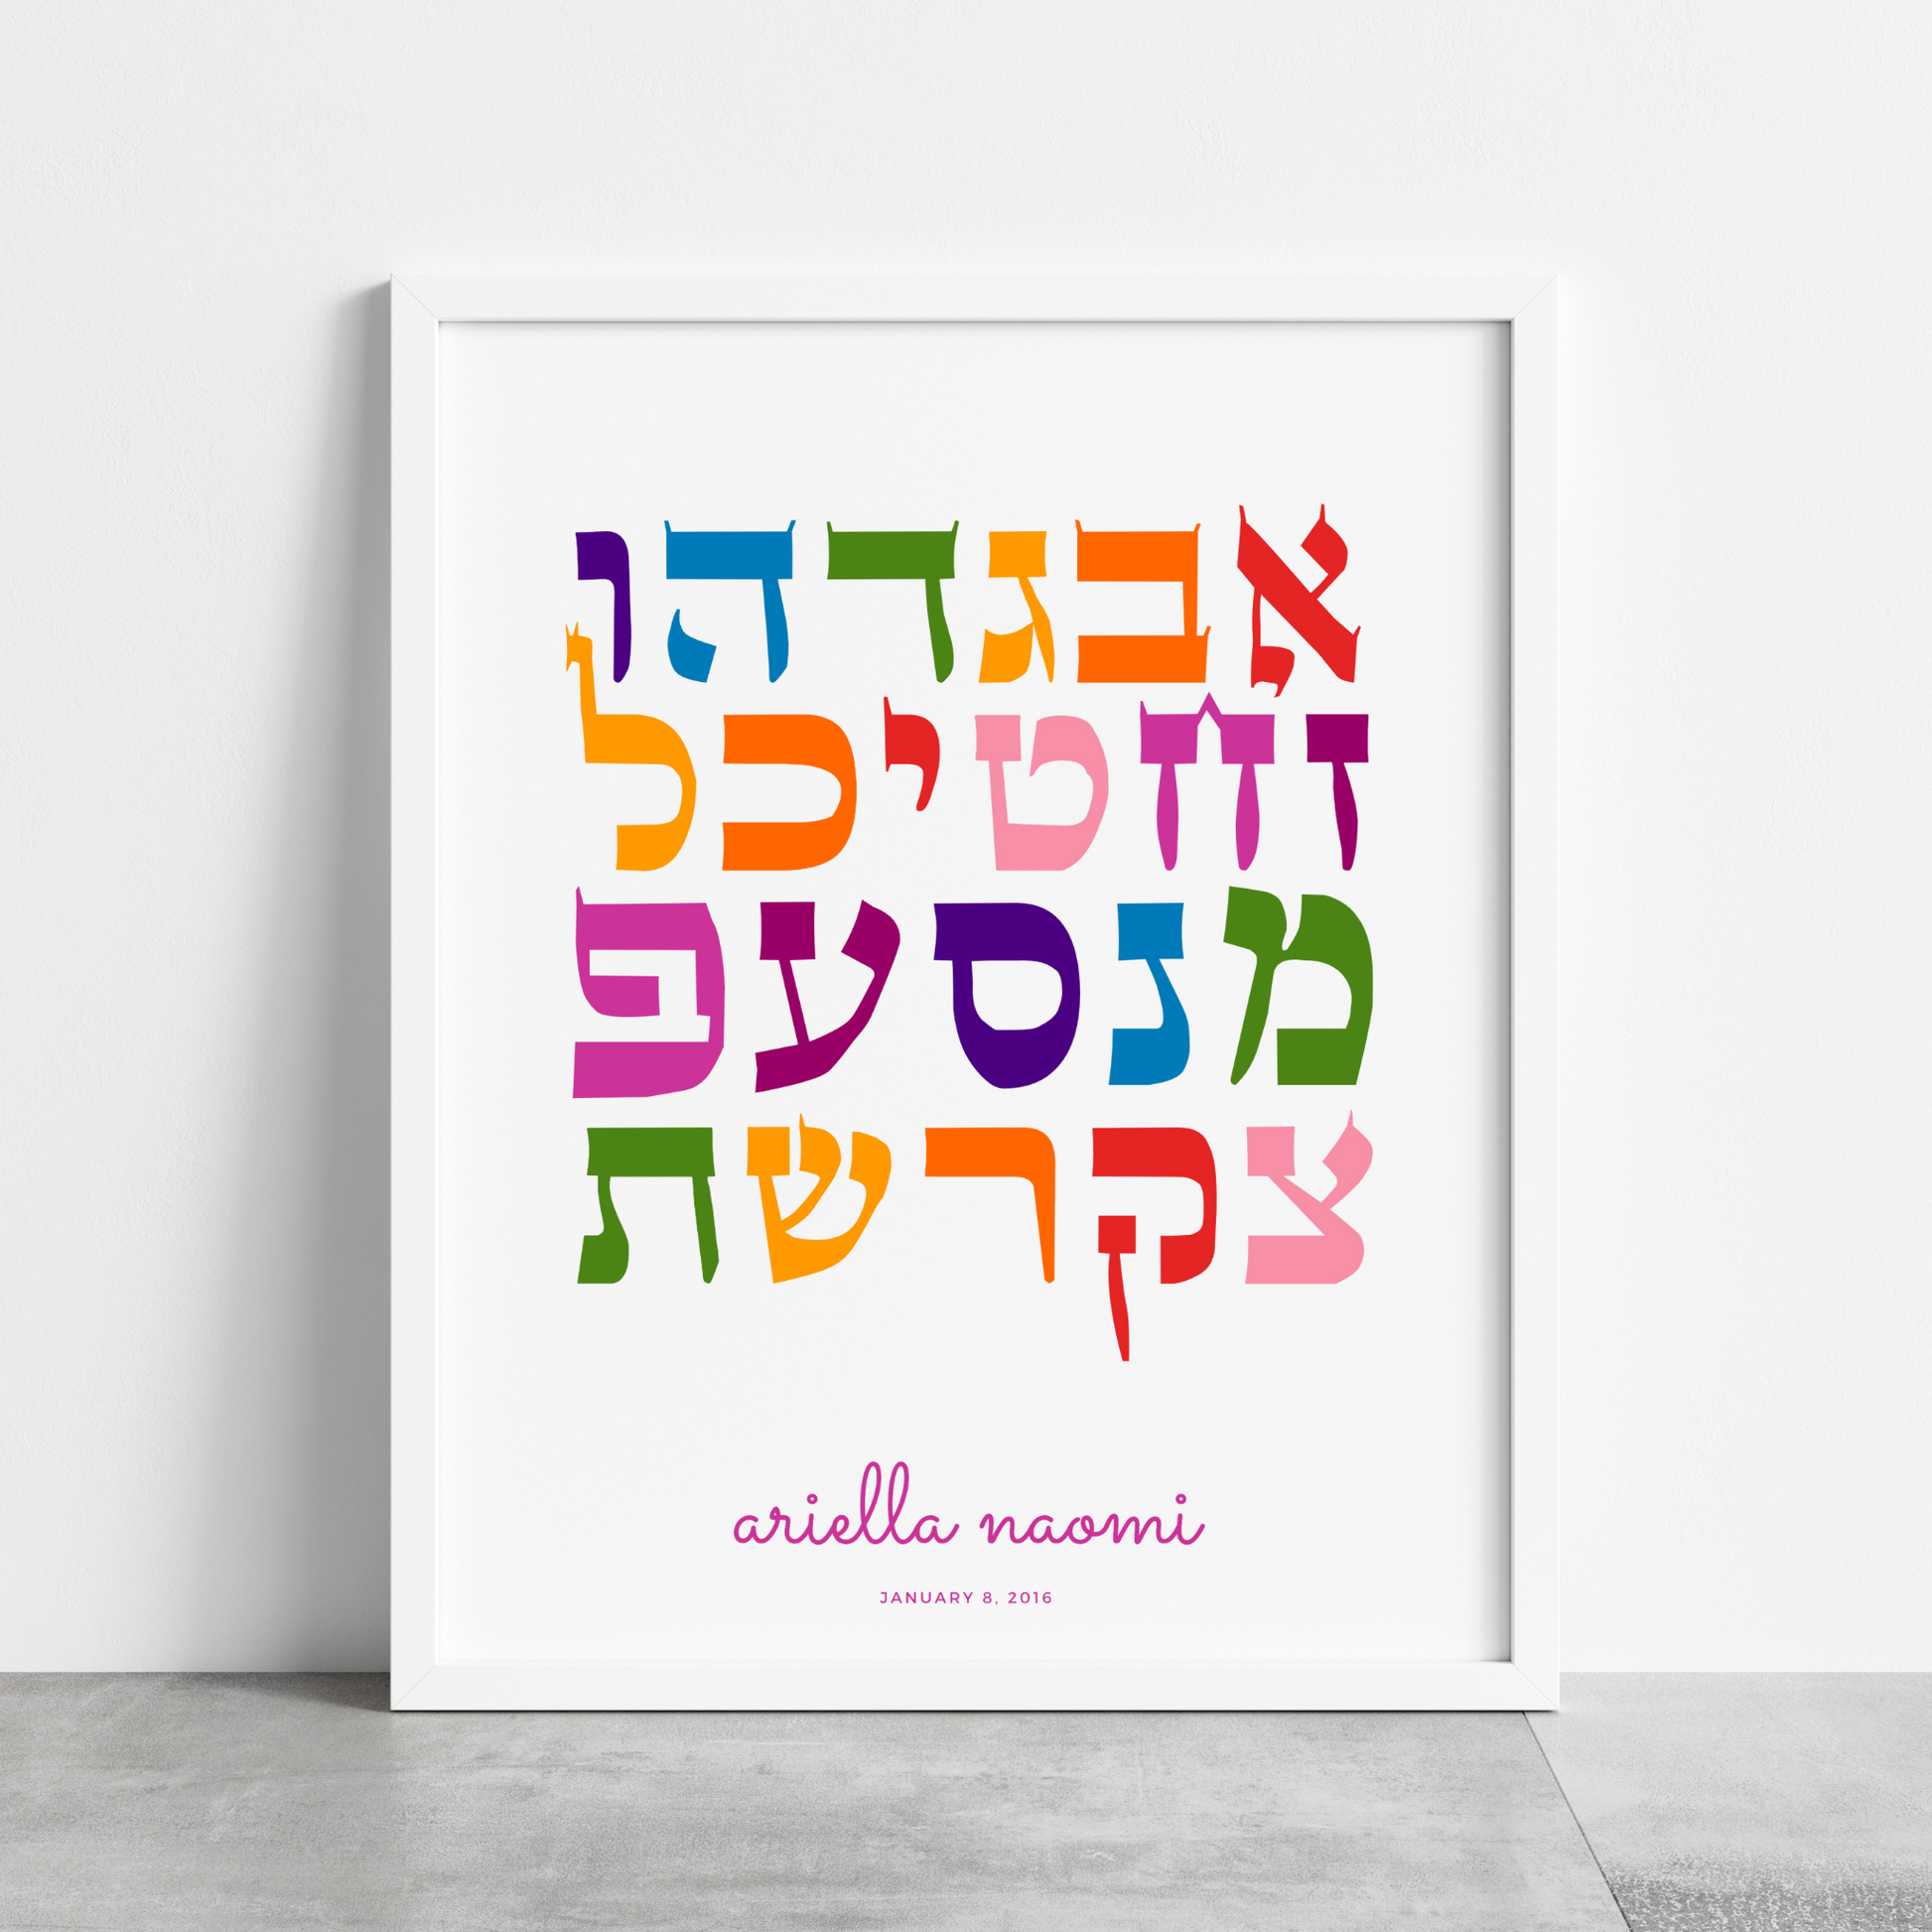 Colorful Hebrew Alphabet Letters Stickers - The Hebrew Alef Bet illustrated  in pictures